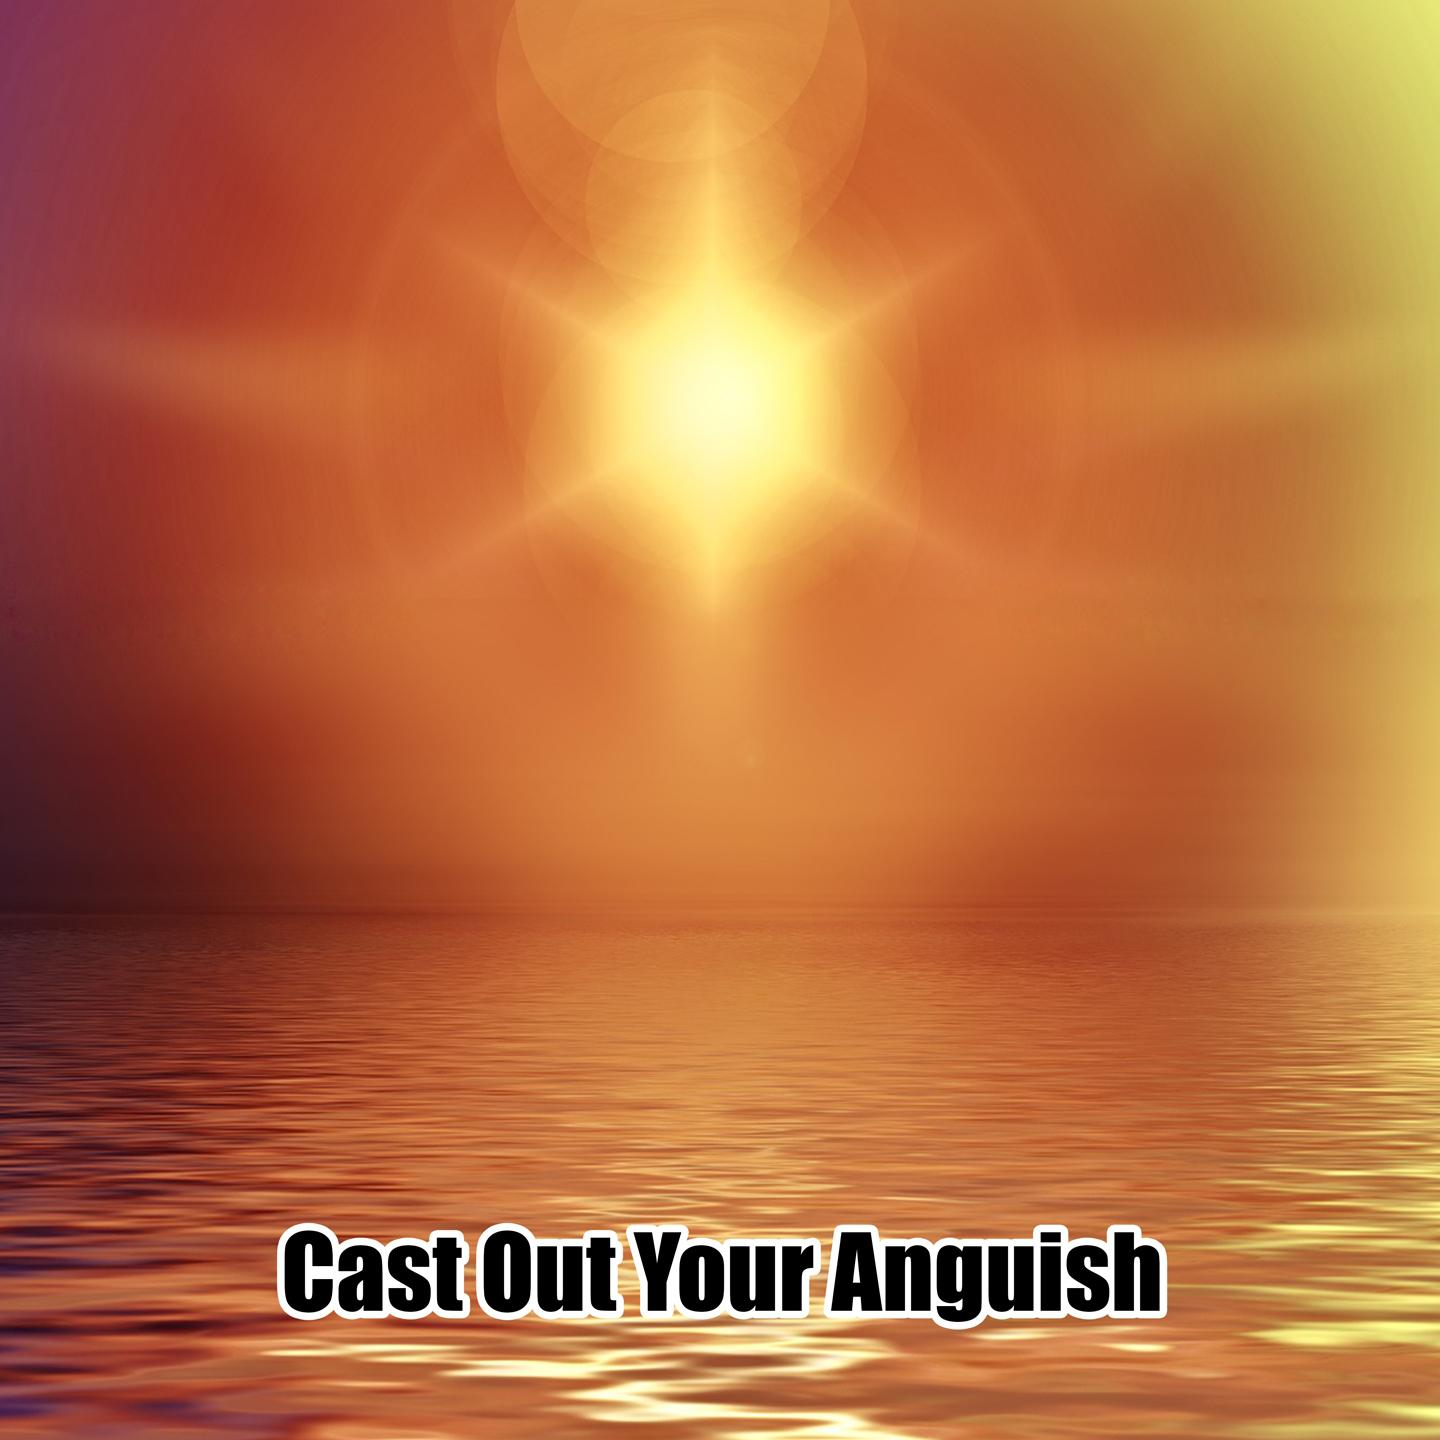 Cast Out Your Anguish